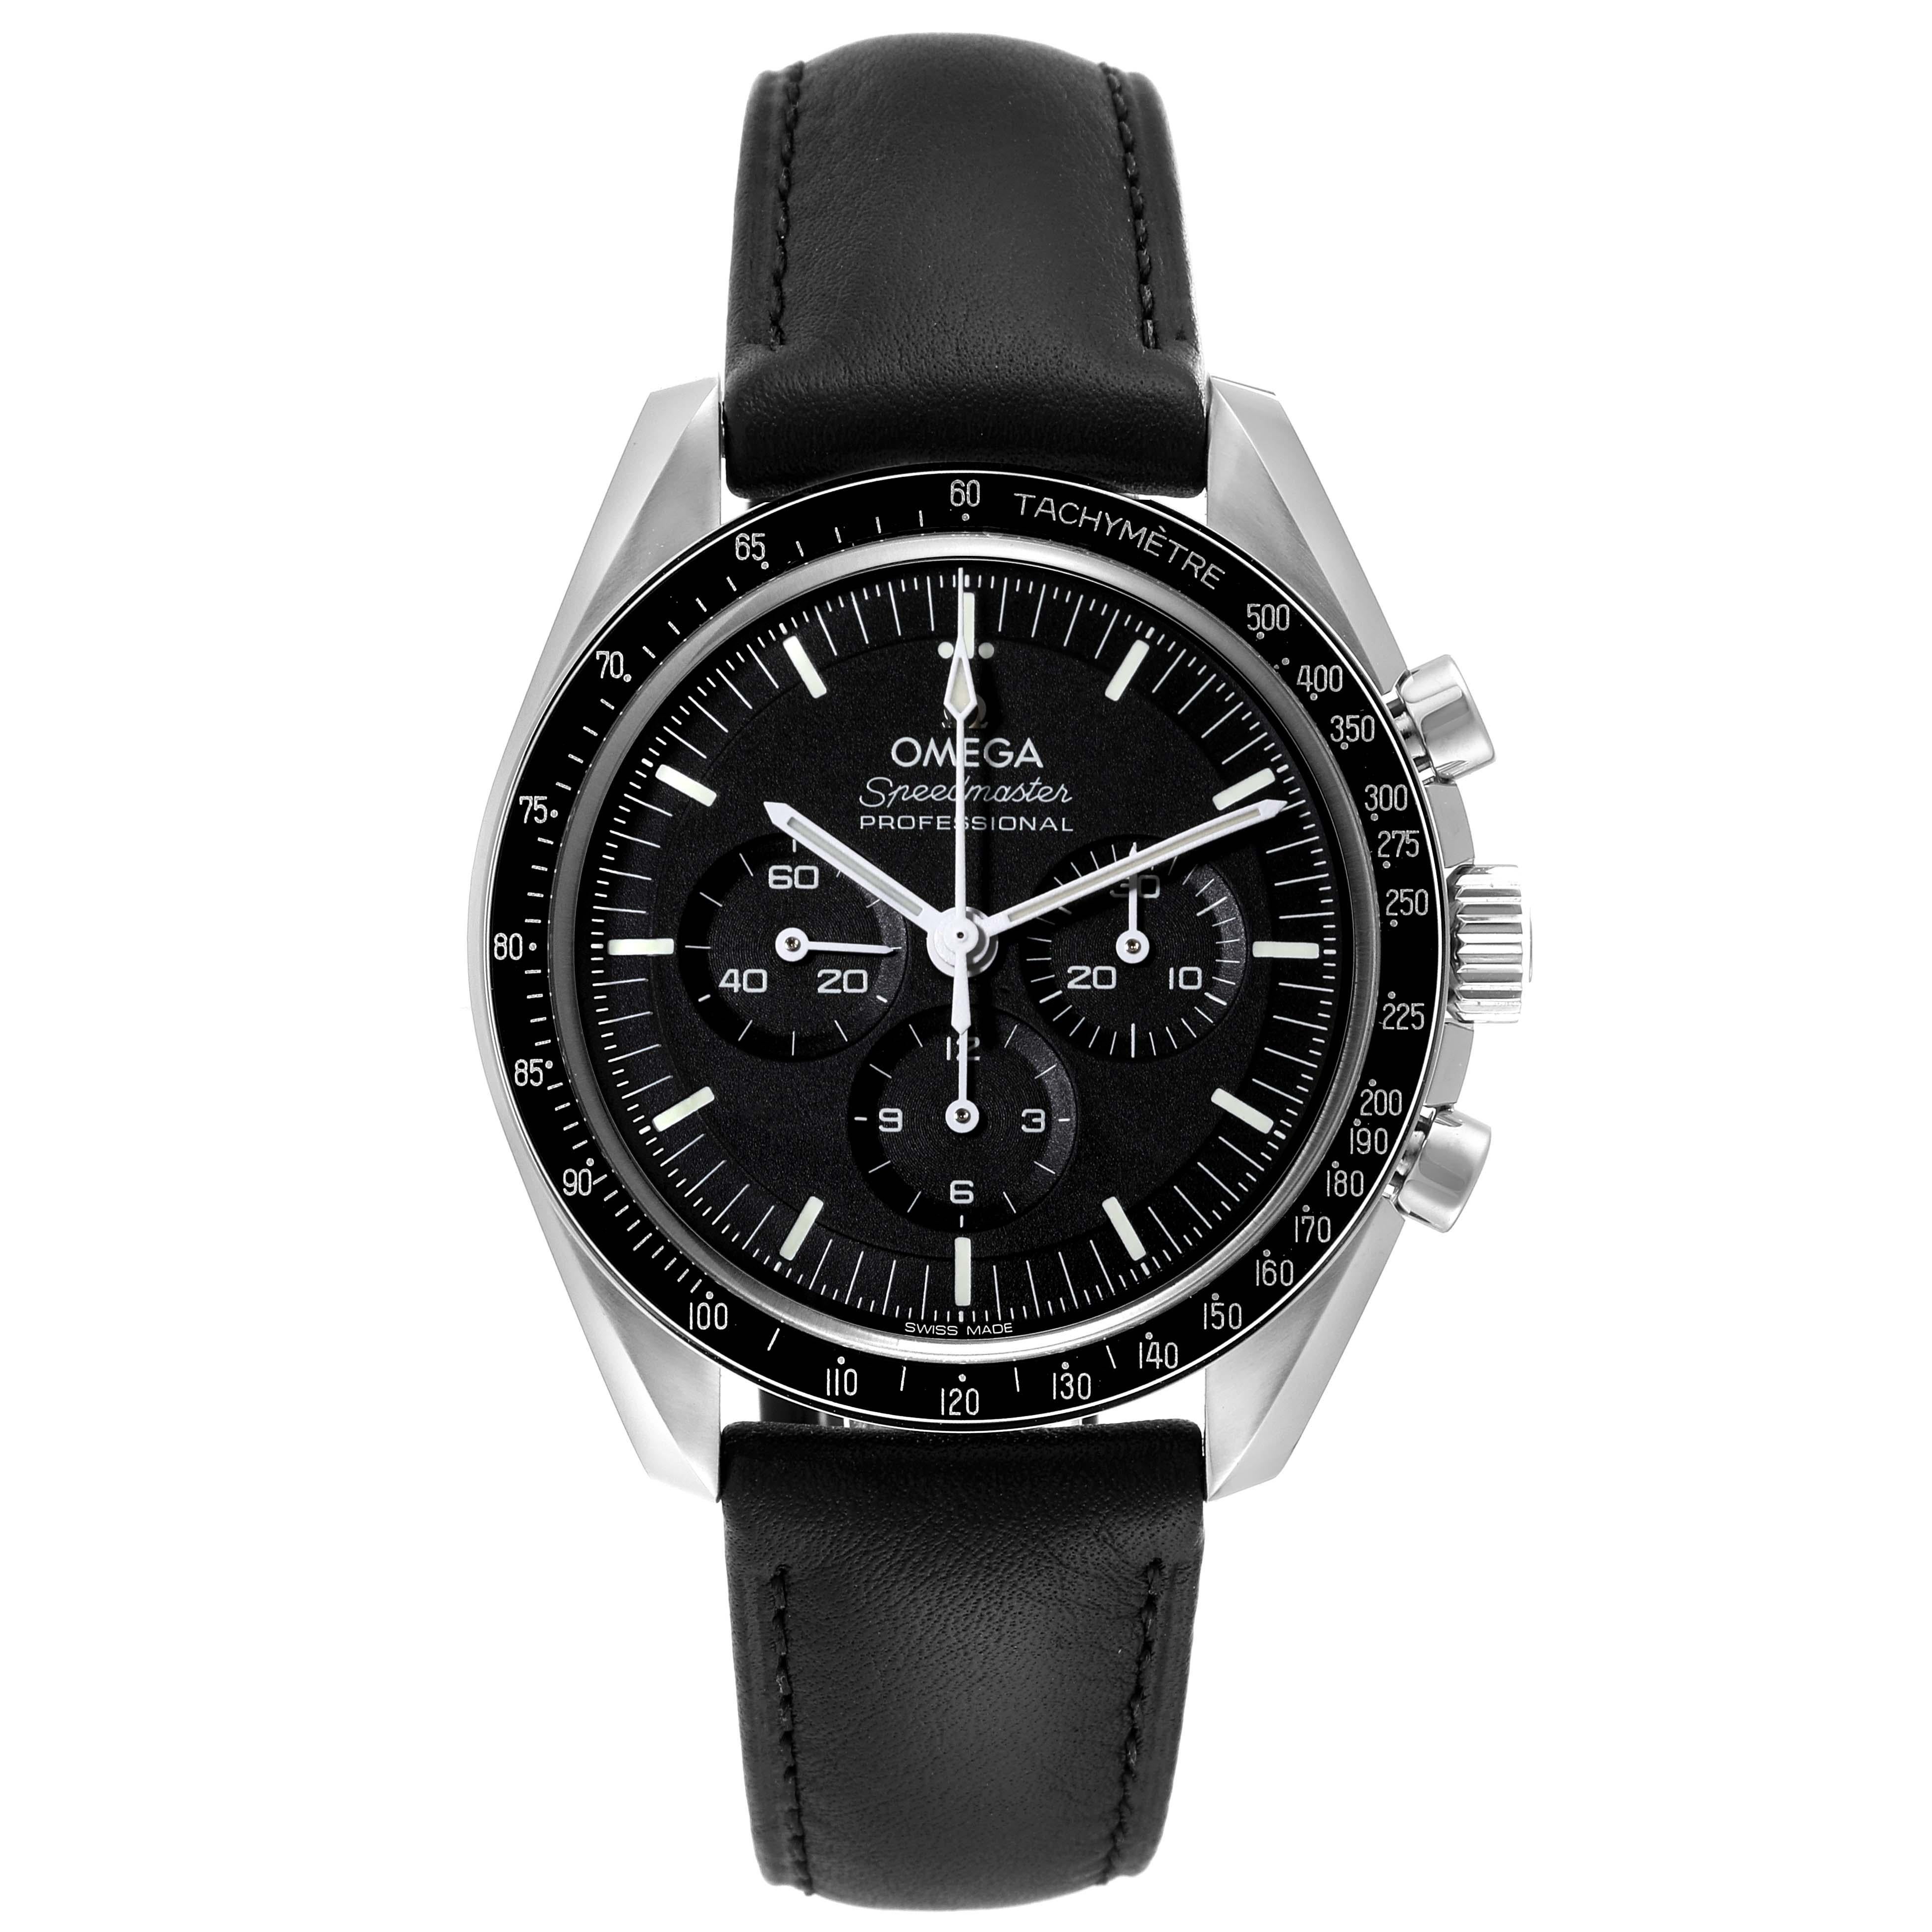 Omega Speedmaster Moonwatch Steel Mens Watch 310.32.42.50.01.002 Box Card. Manual winding chronograph movement. Stainless steel round case 42 mm in diameter. Omega logo on the crown. Transparent exhibition sapphire crystal caseback. Black bezel with